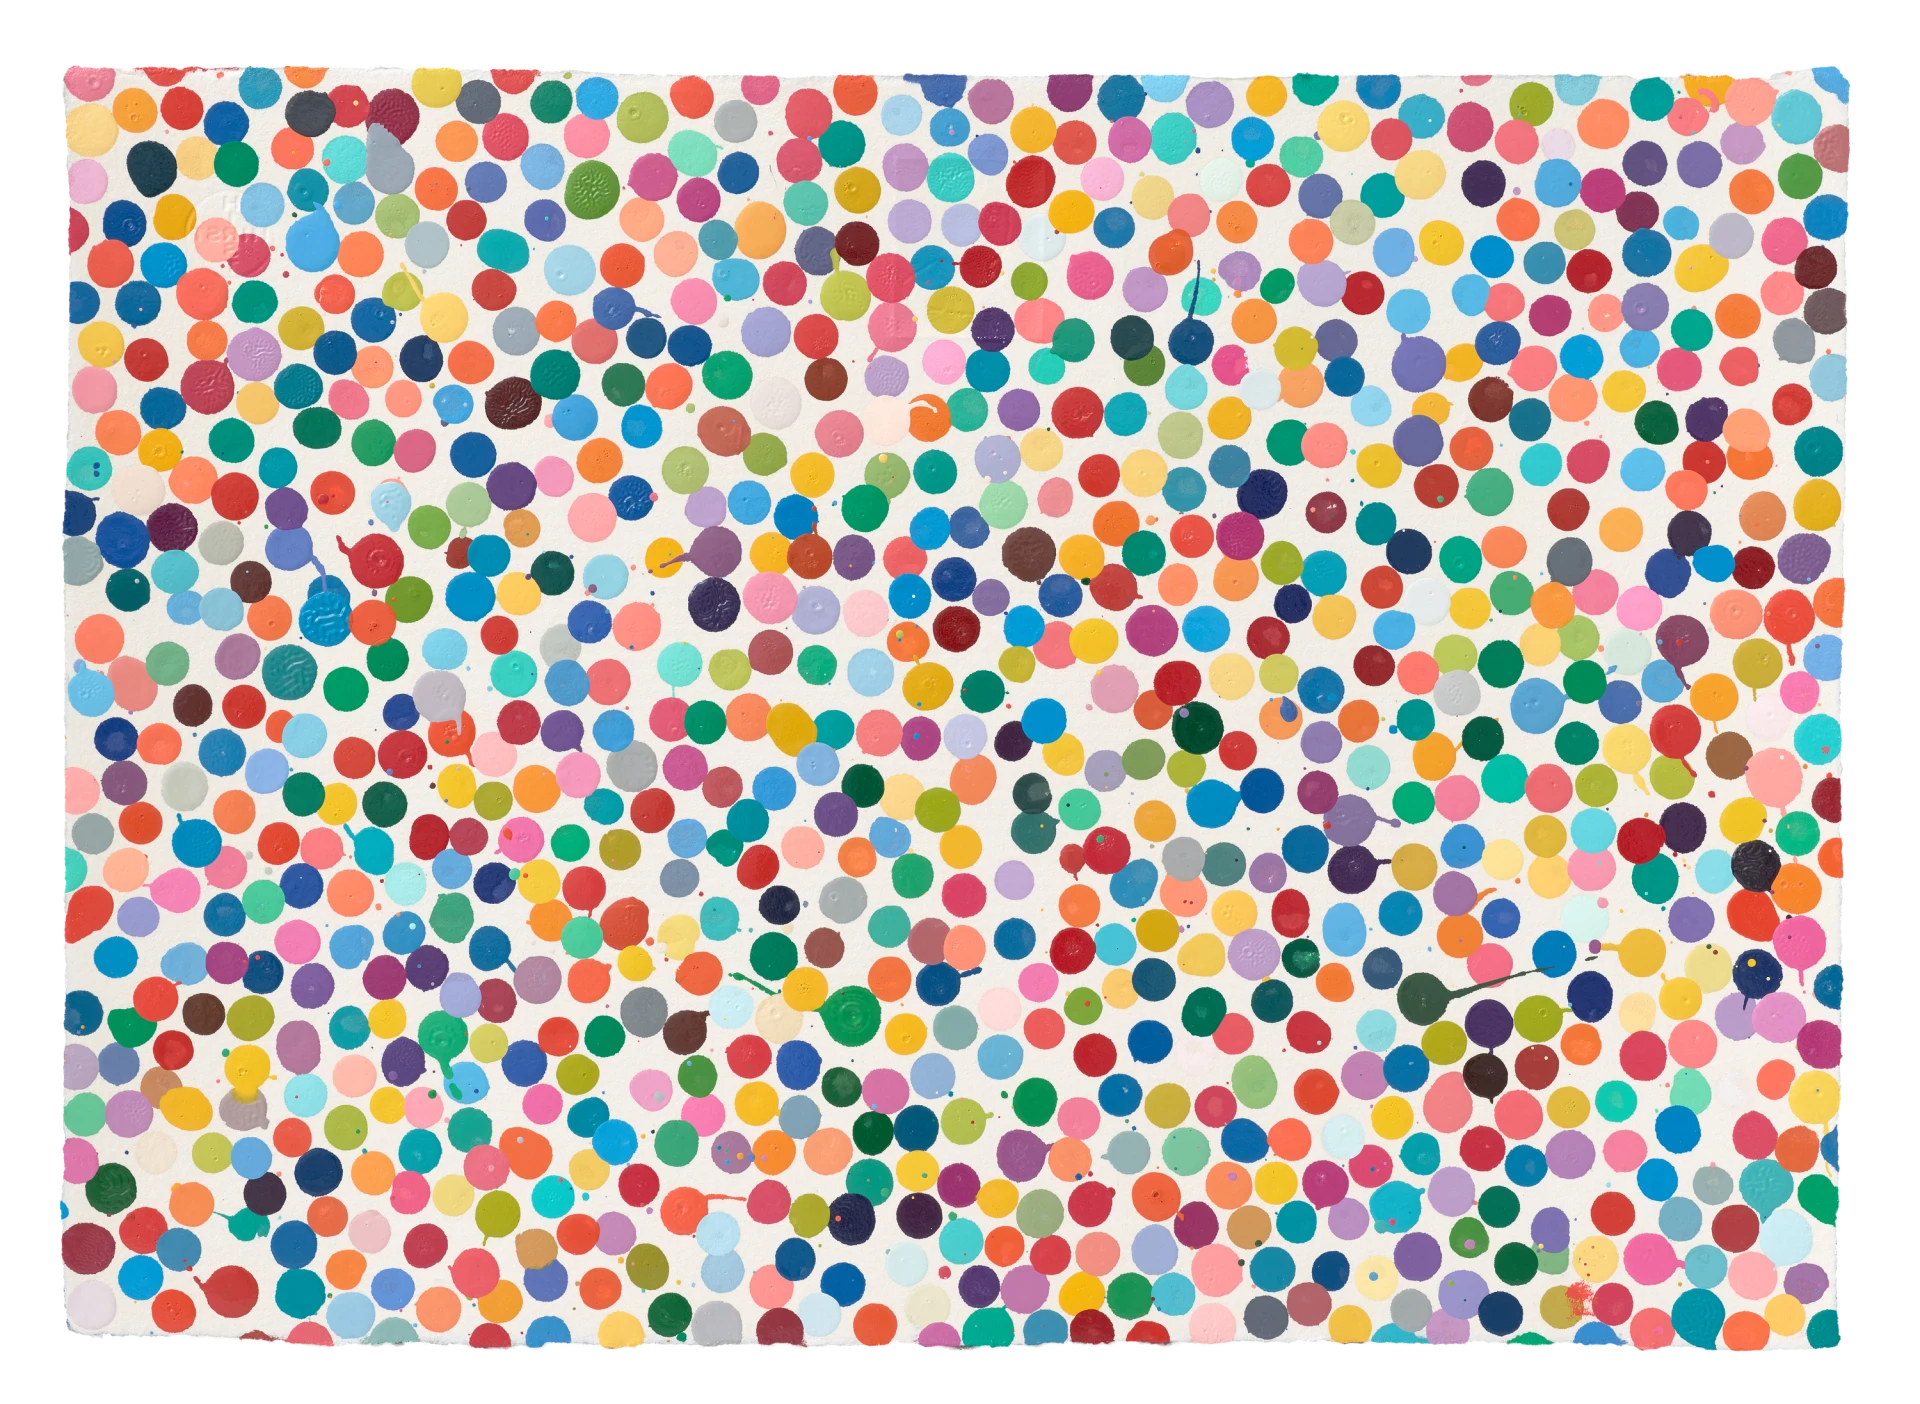 1865. One thing to remember by Damien Hirst